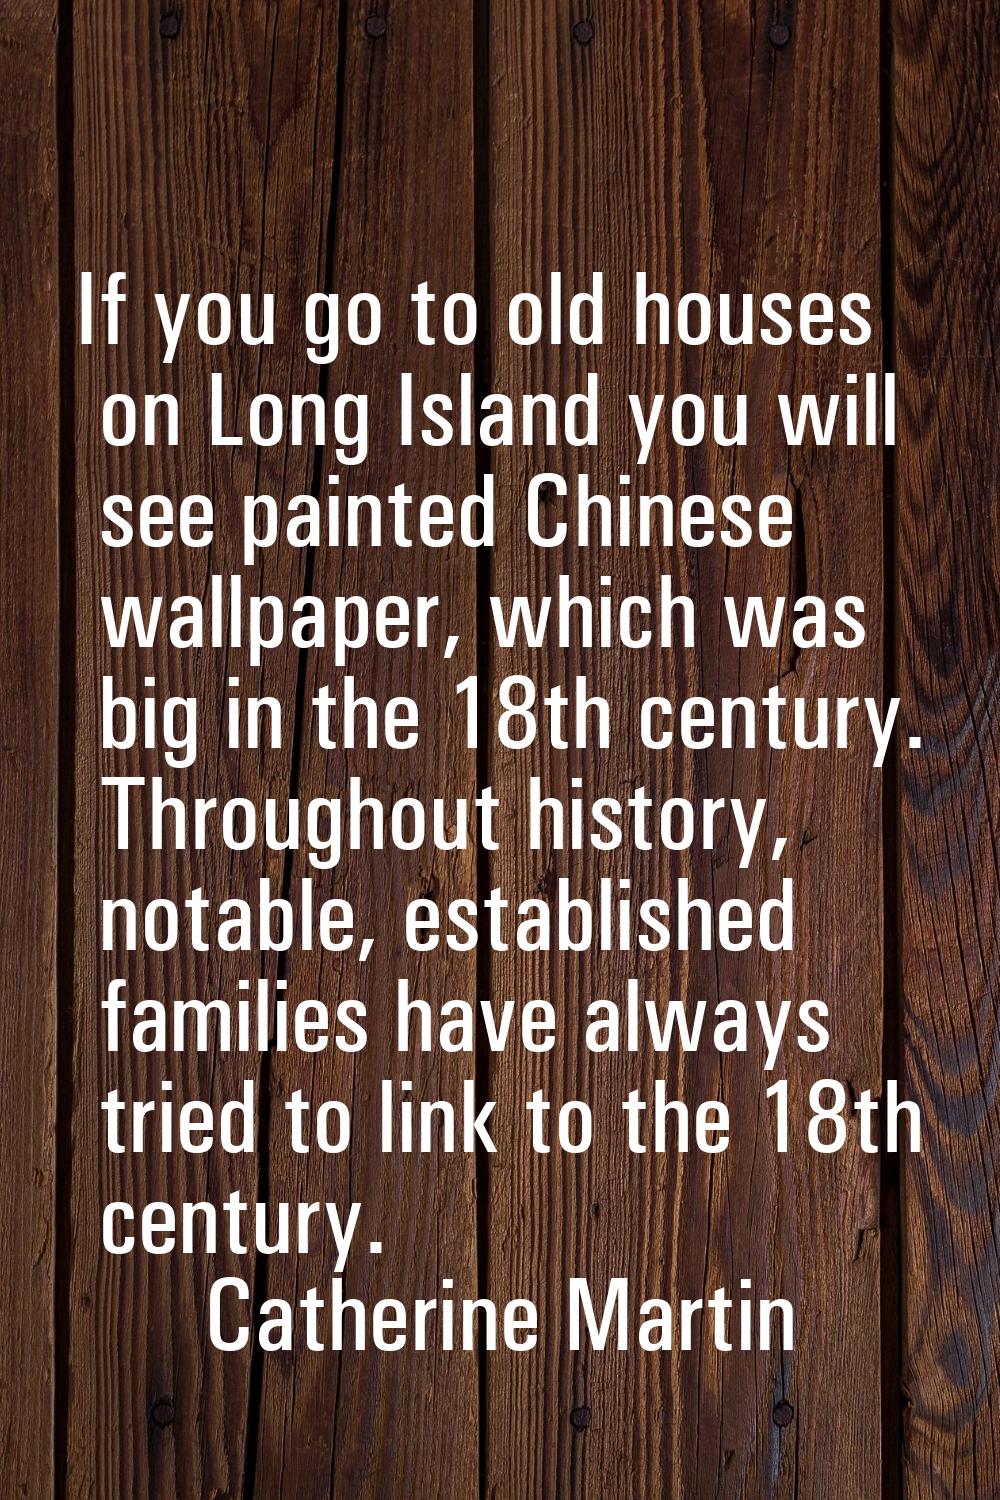 If you go to old houses on Long Island you will see painted Chinese wallpaper, which was big in the